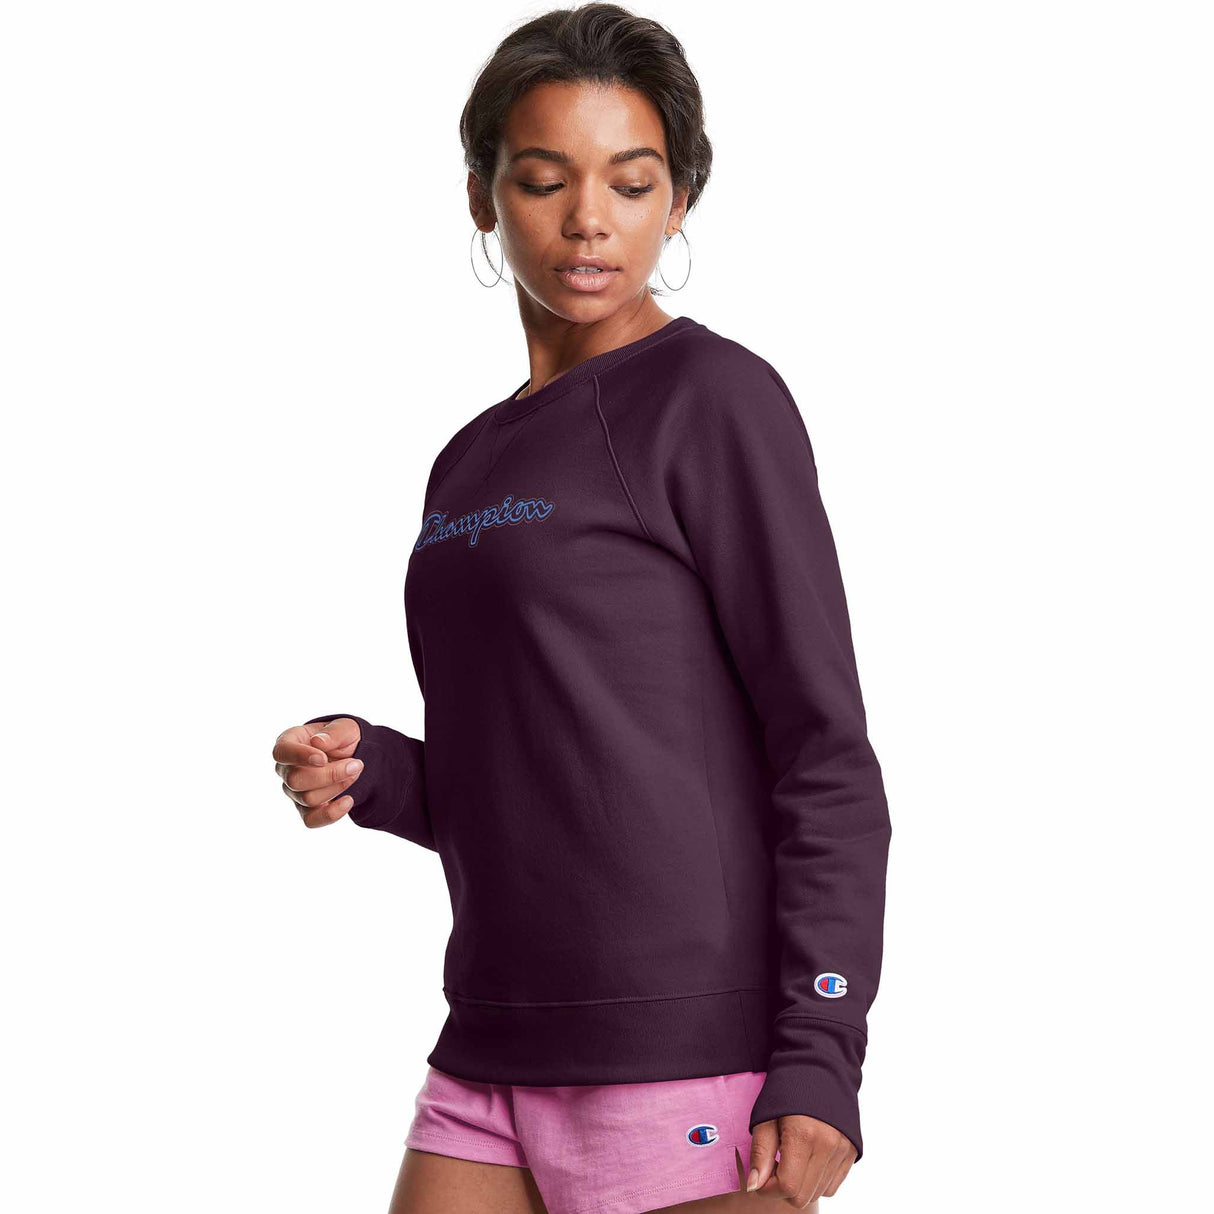 Champion Powerblend Classic Crew Embroidered Logo chandail molletonné pour femme Dark Berry Purple angle